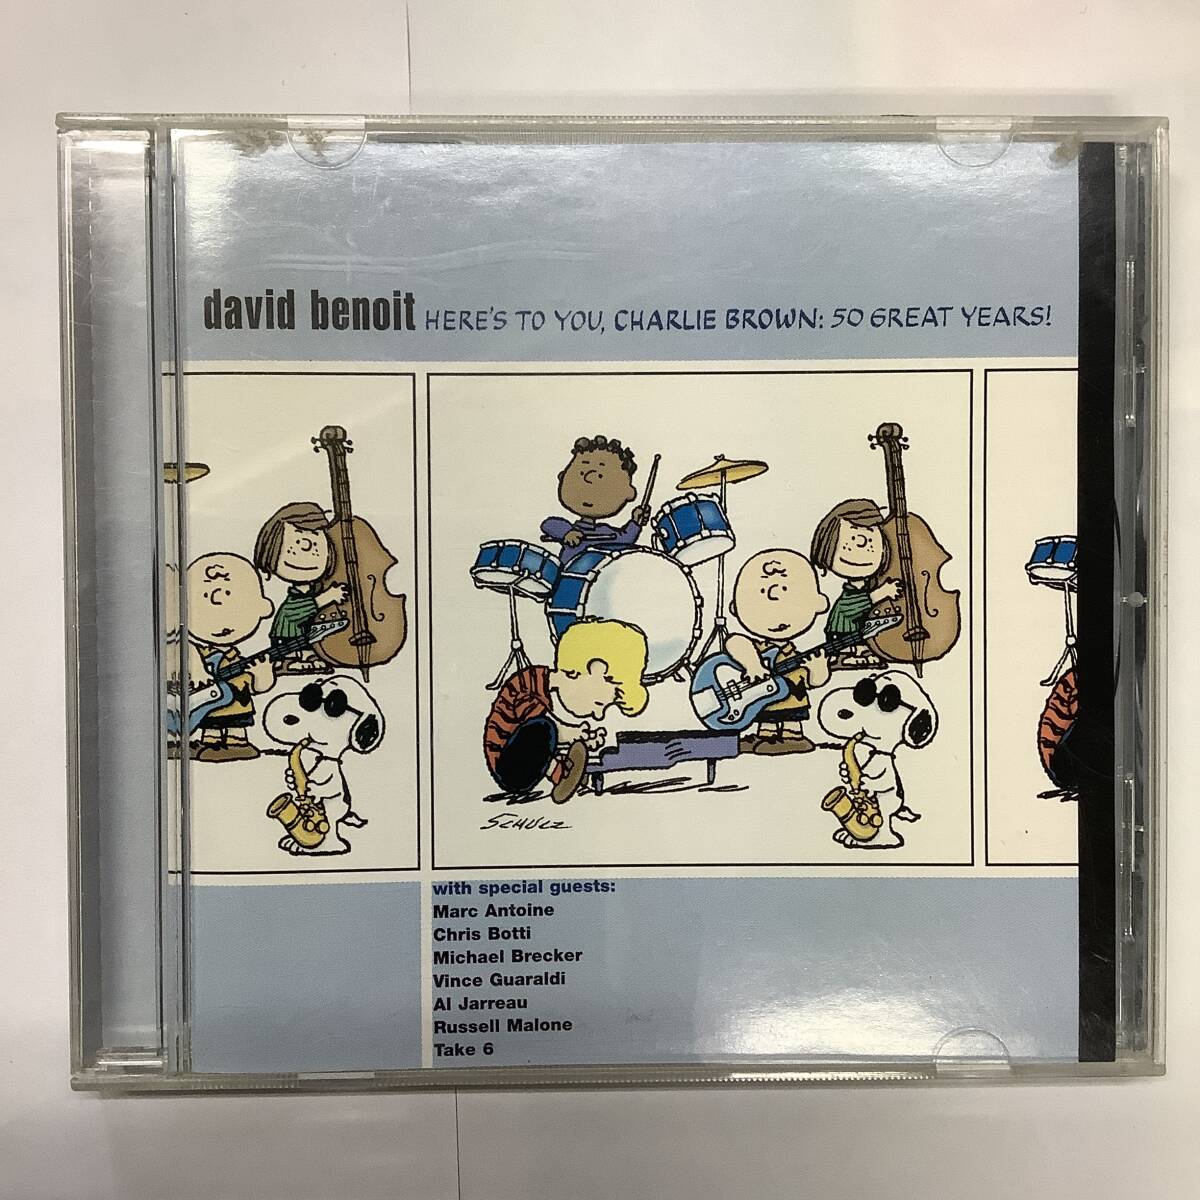 DavidBenoit Here’s to You Charlie Brown 50 Great Years 輸入盤CD 314543637-2 デイヴィッド ベノワ_画像1